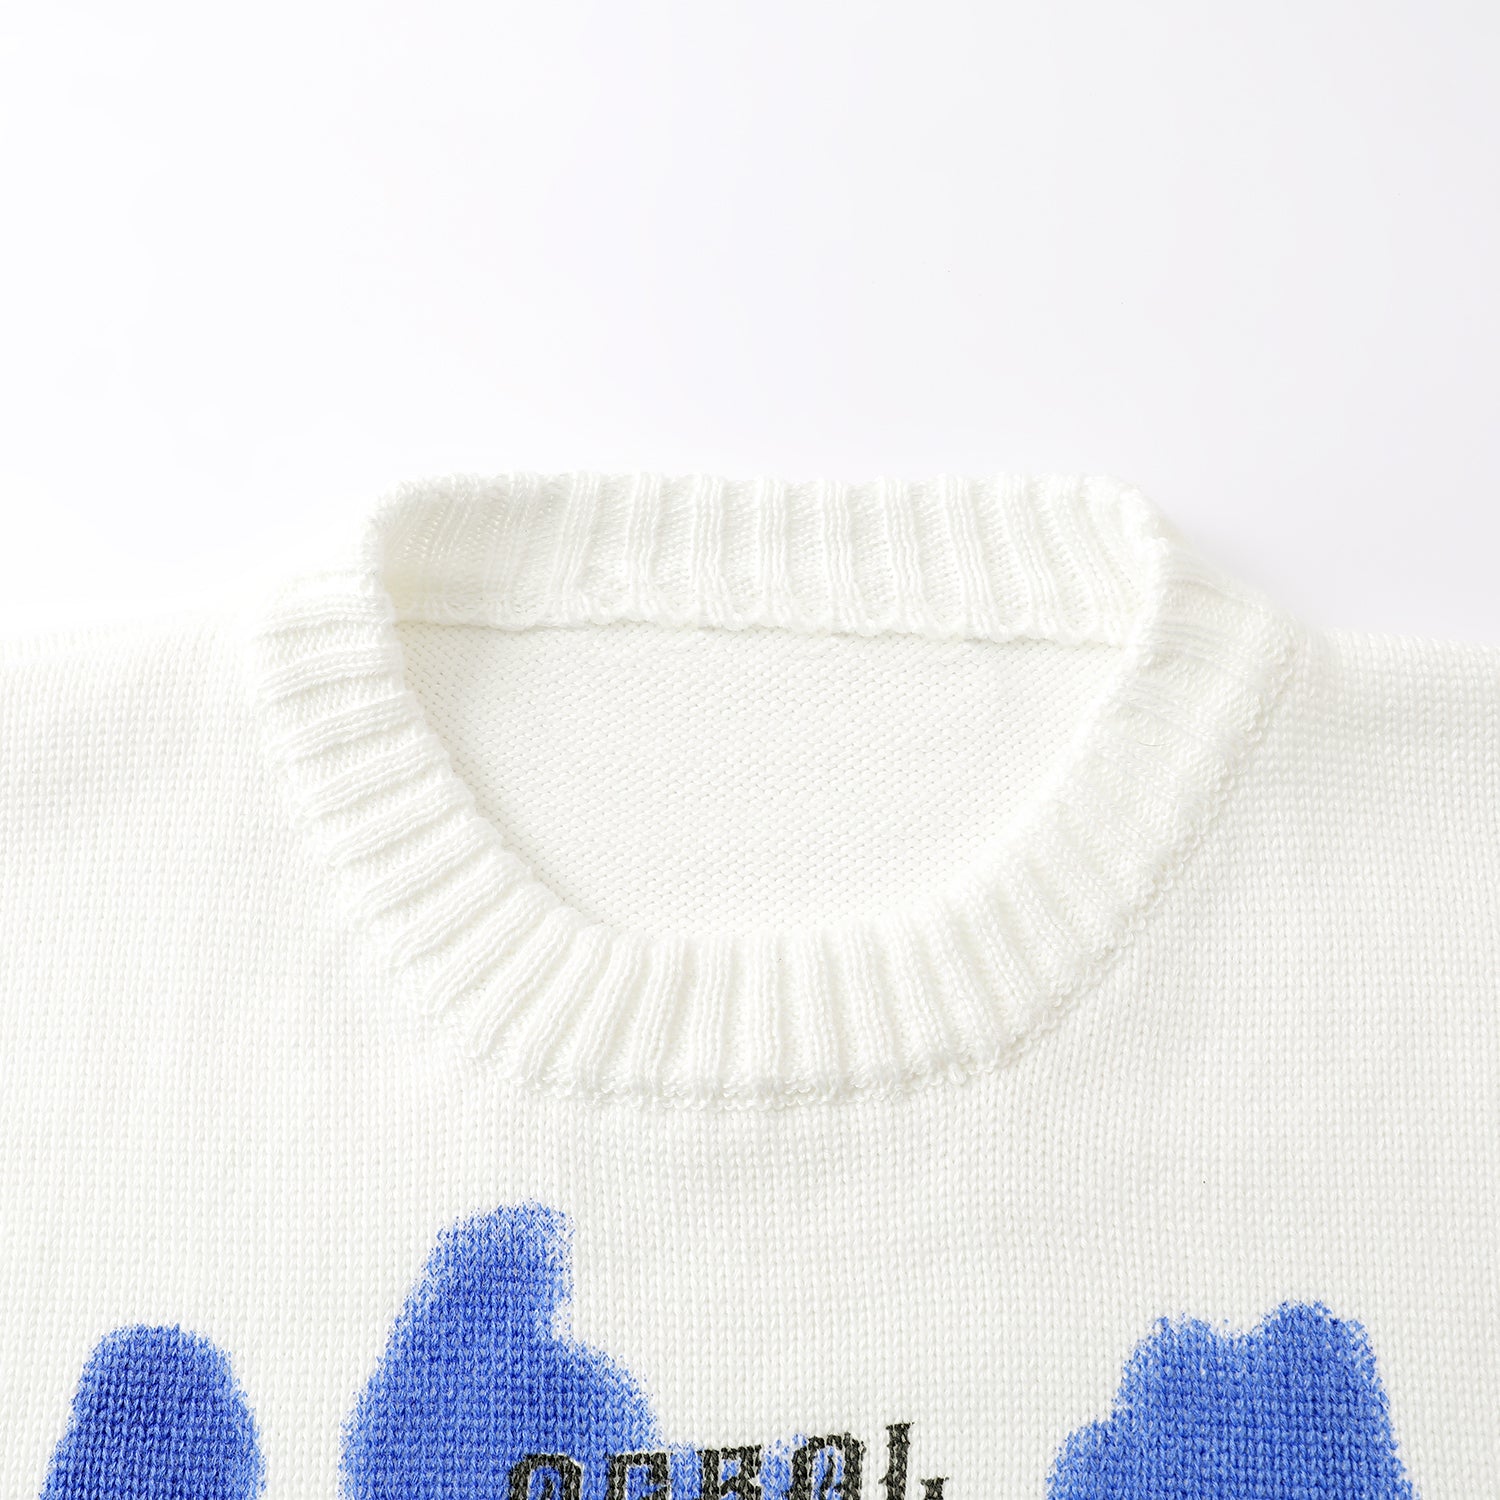 JUSTNOTAG Vintage Graffiti Letter Jacquard Knitted Sweater